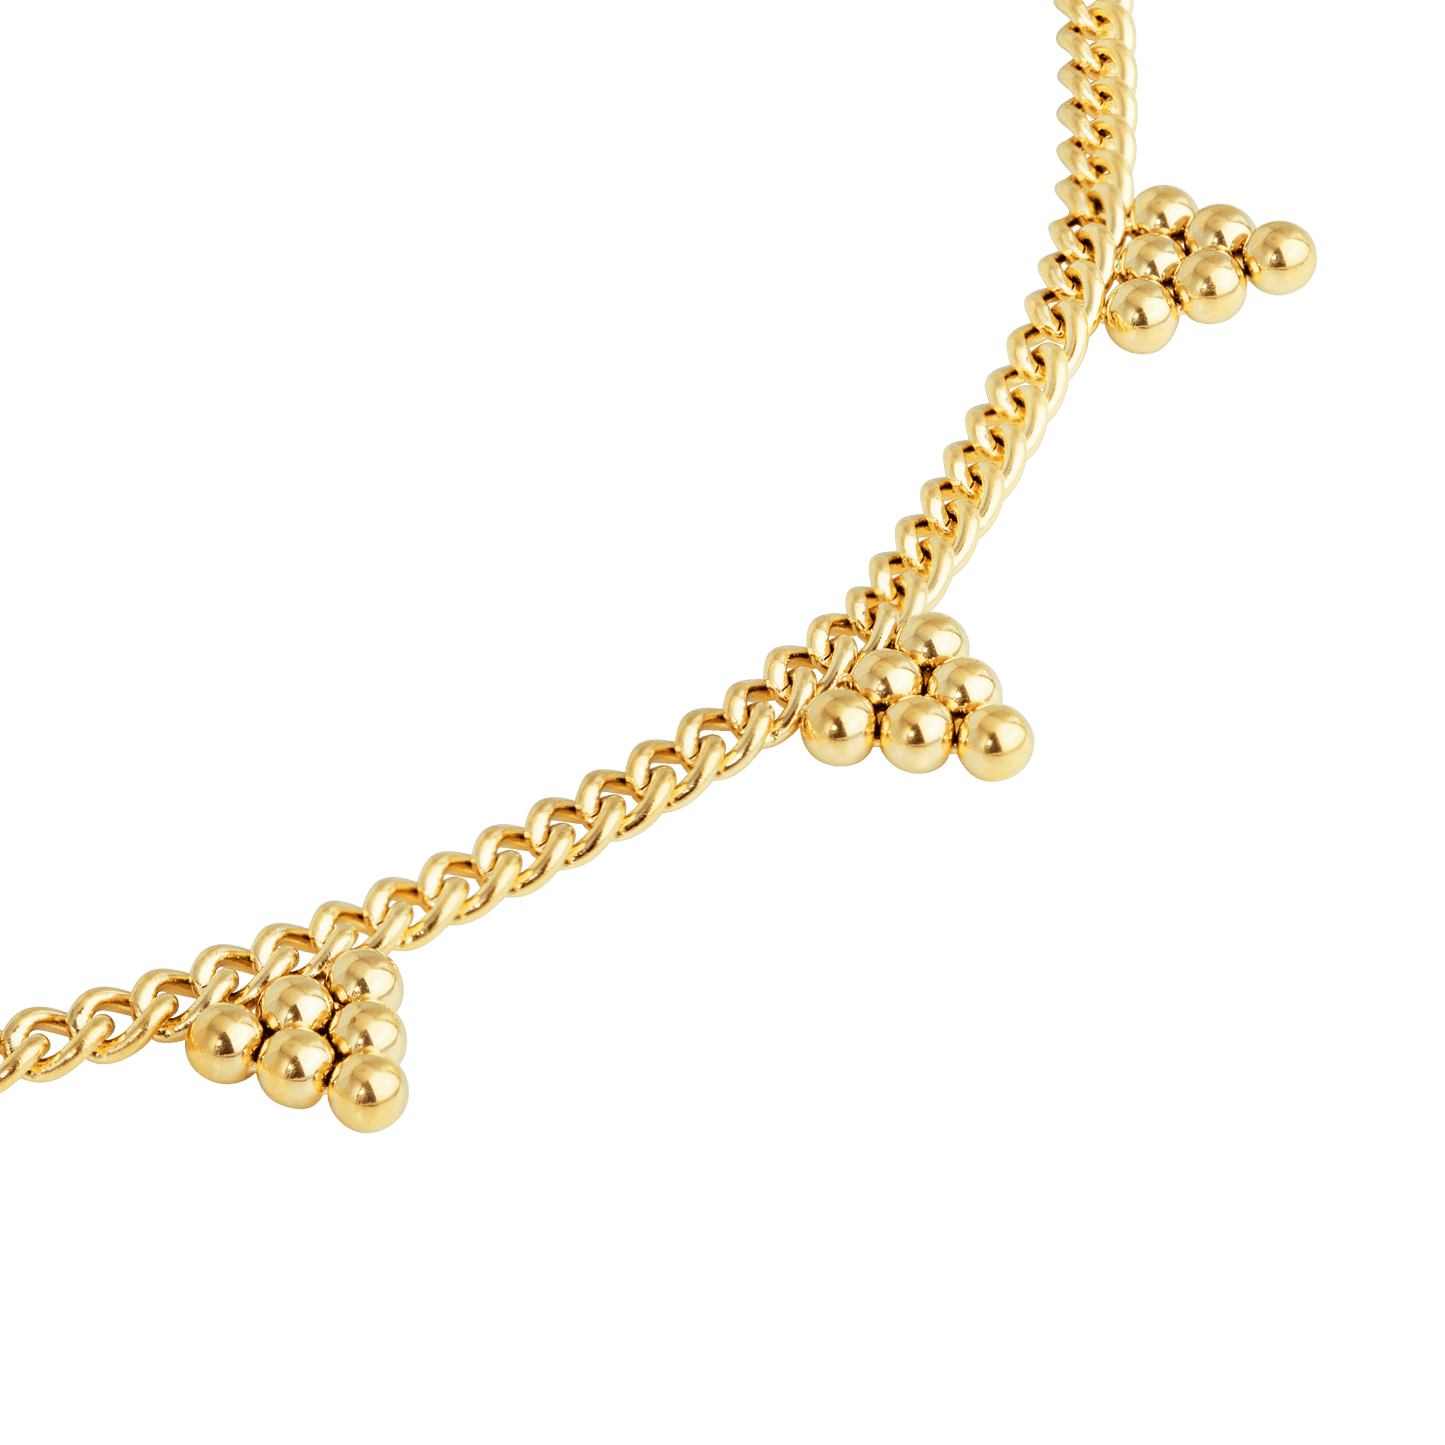 Tiny Beads Necklace Gold